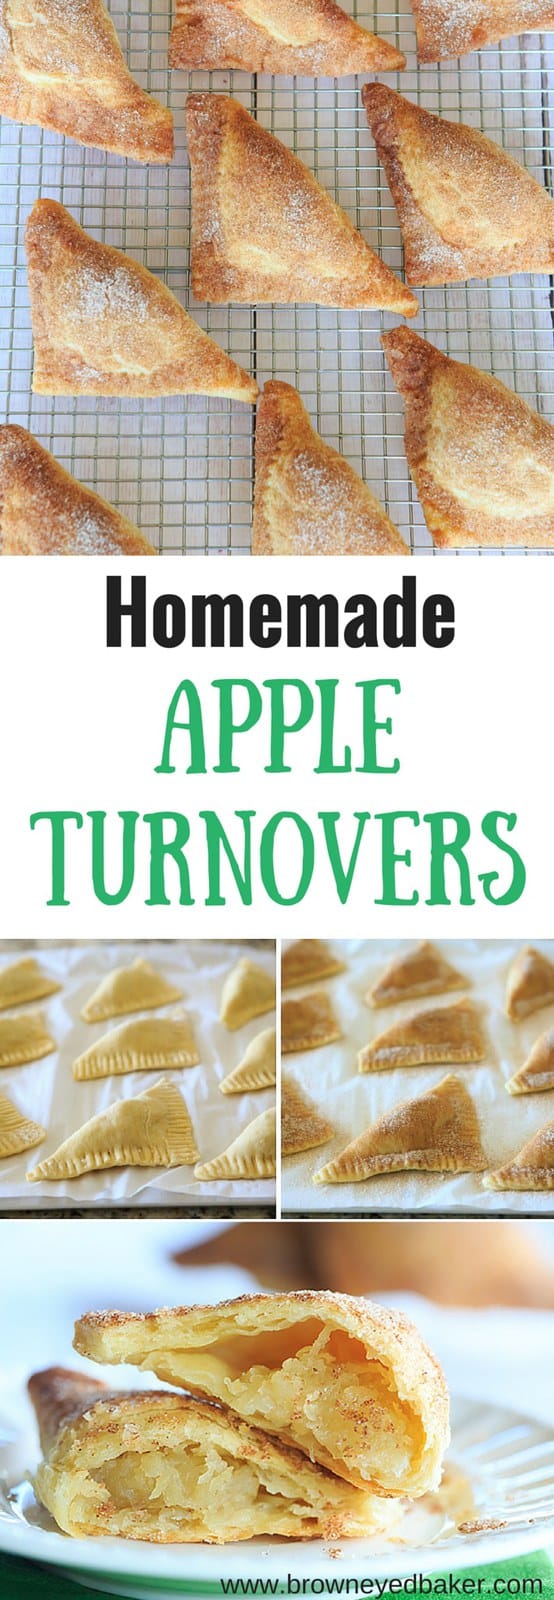 Apple Turnovers FROM SCRATCH! Flaky pastry dough and a slightly sweet apple filling... | https://www.browneyedbaker.com/apple-turnovers-from-scratch/